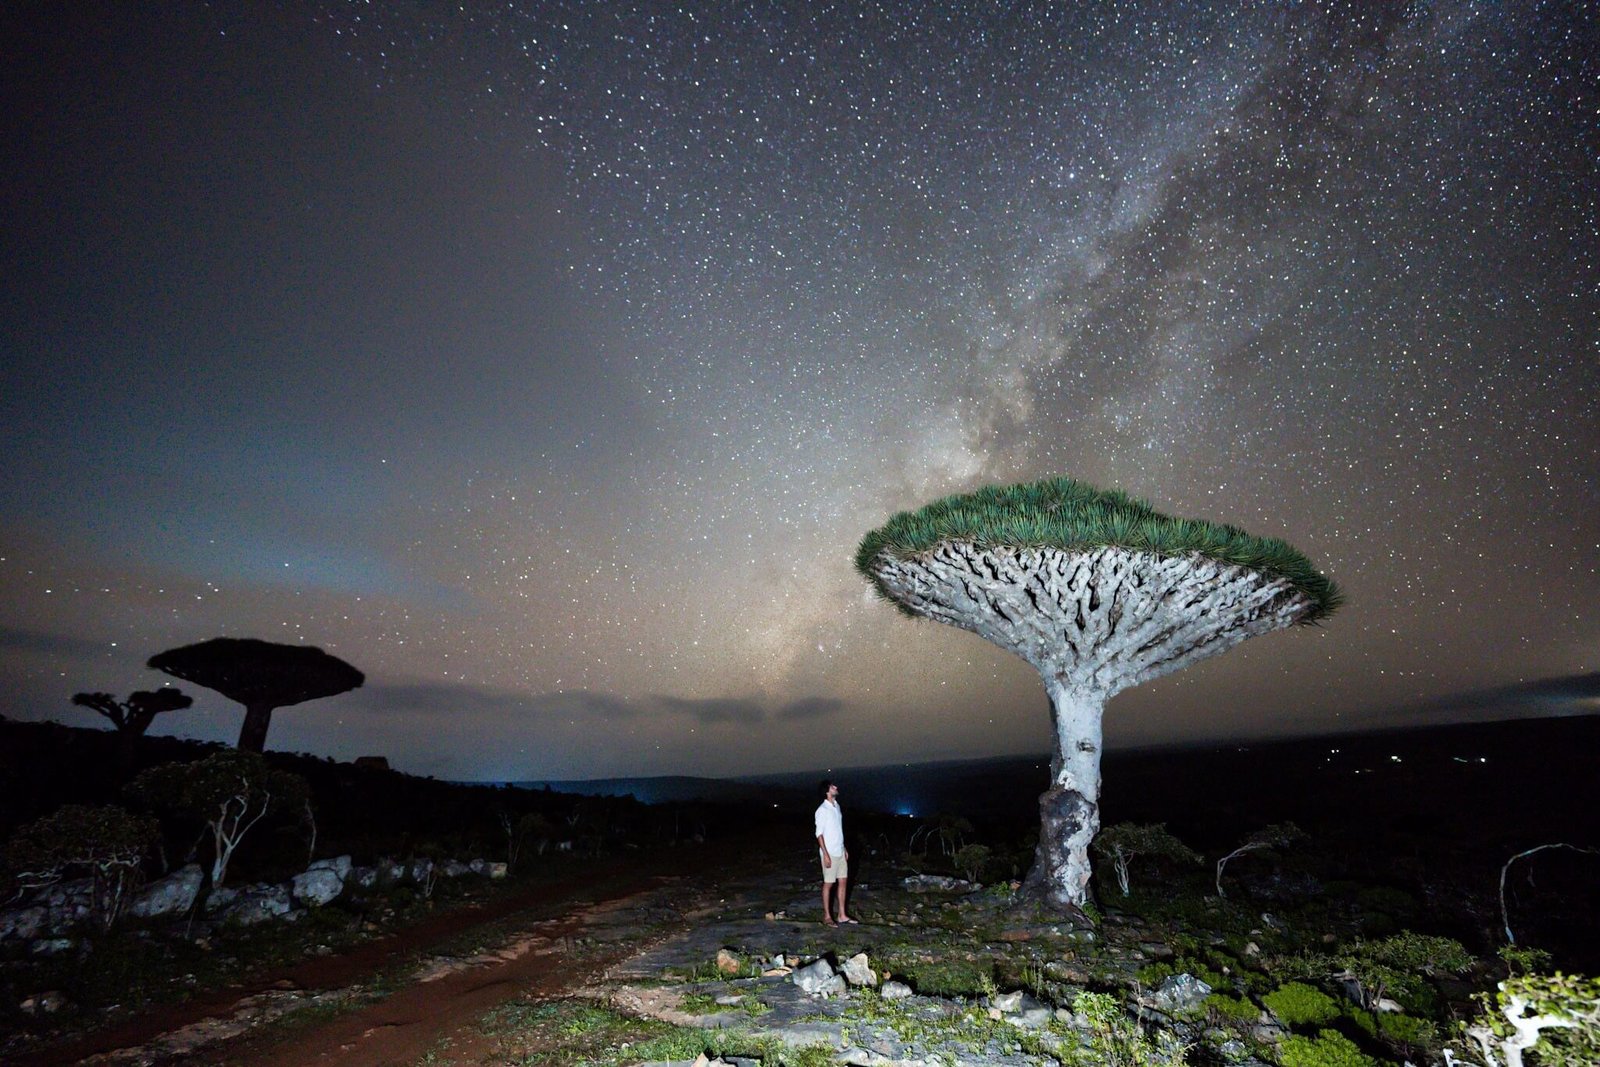 astrophotography on the Socotra Island tour